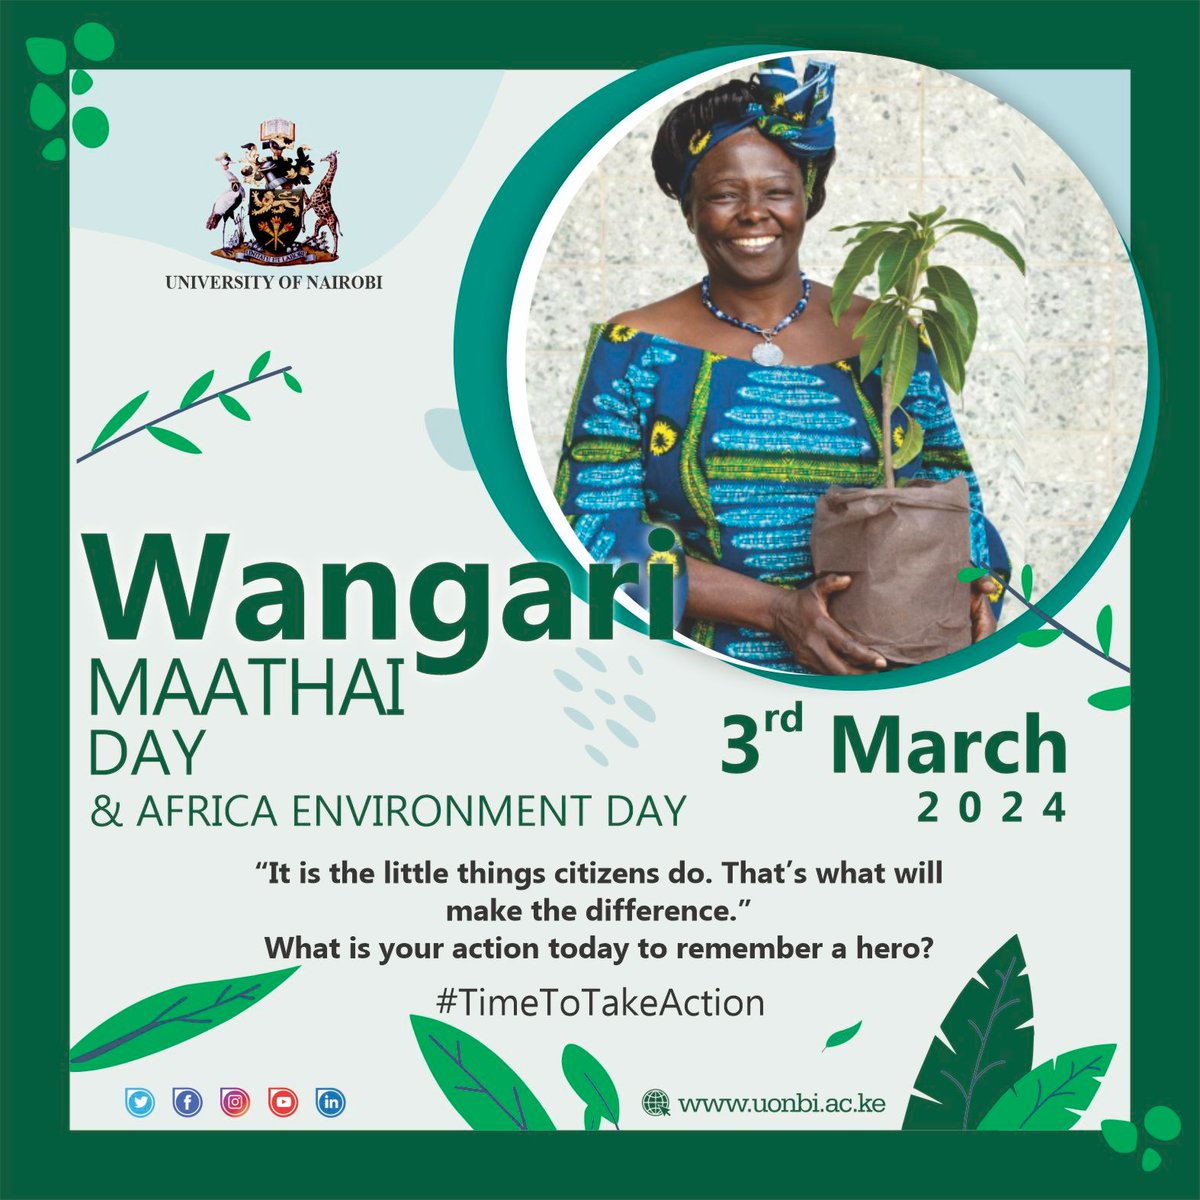 Late Prof. Wangari Maathai's message of 'planting trees, not just talking' continues to resonate today. We need more like her who turn ideas into action. Today @uonbi has celebrated her legacy by planting ceremonial trees at in Embu. #Timetotakeaction #WangariMaathaiDay #Africa